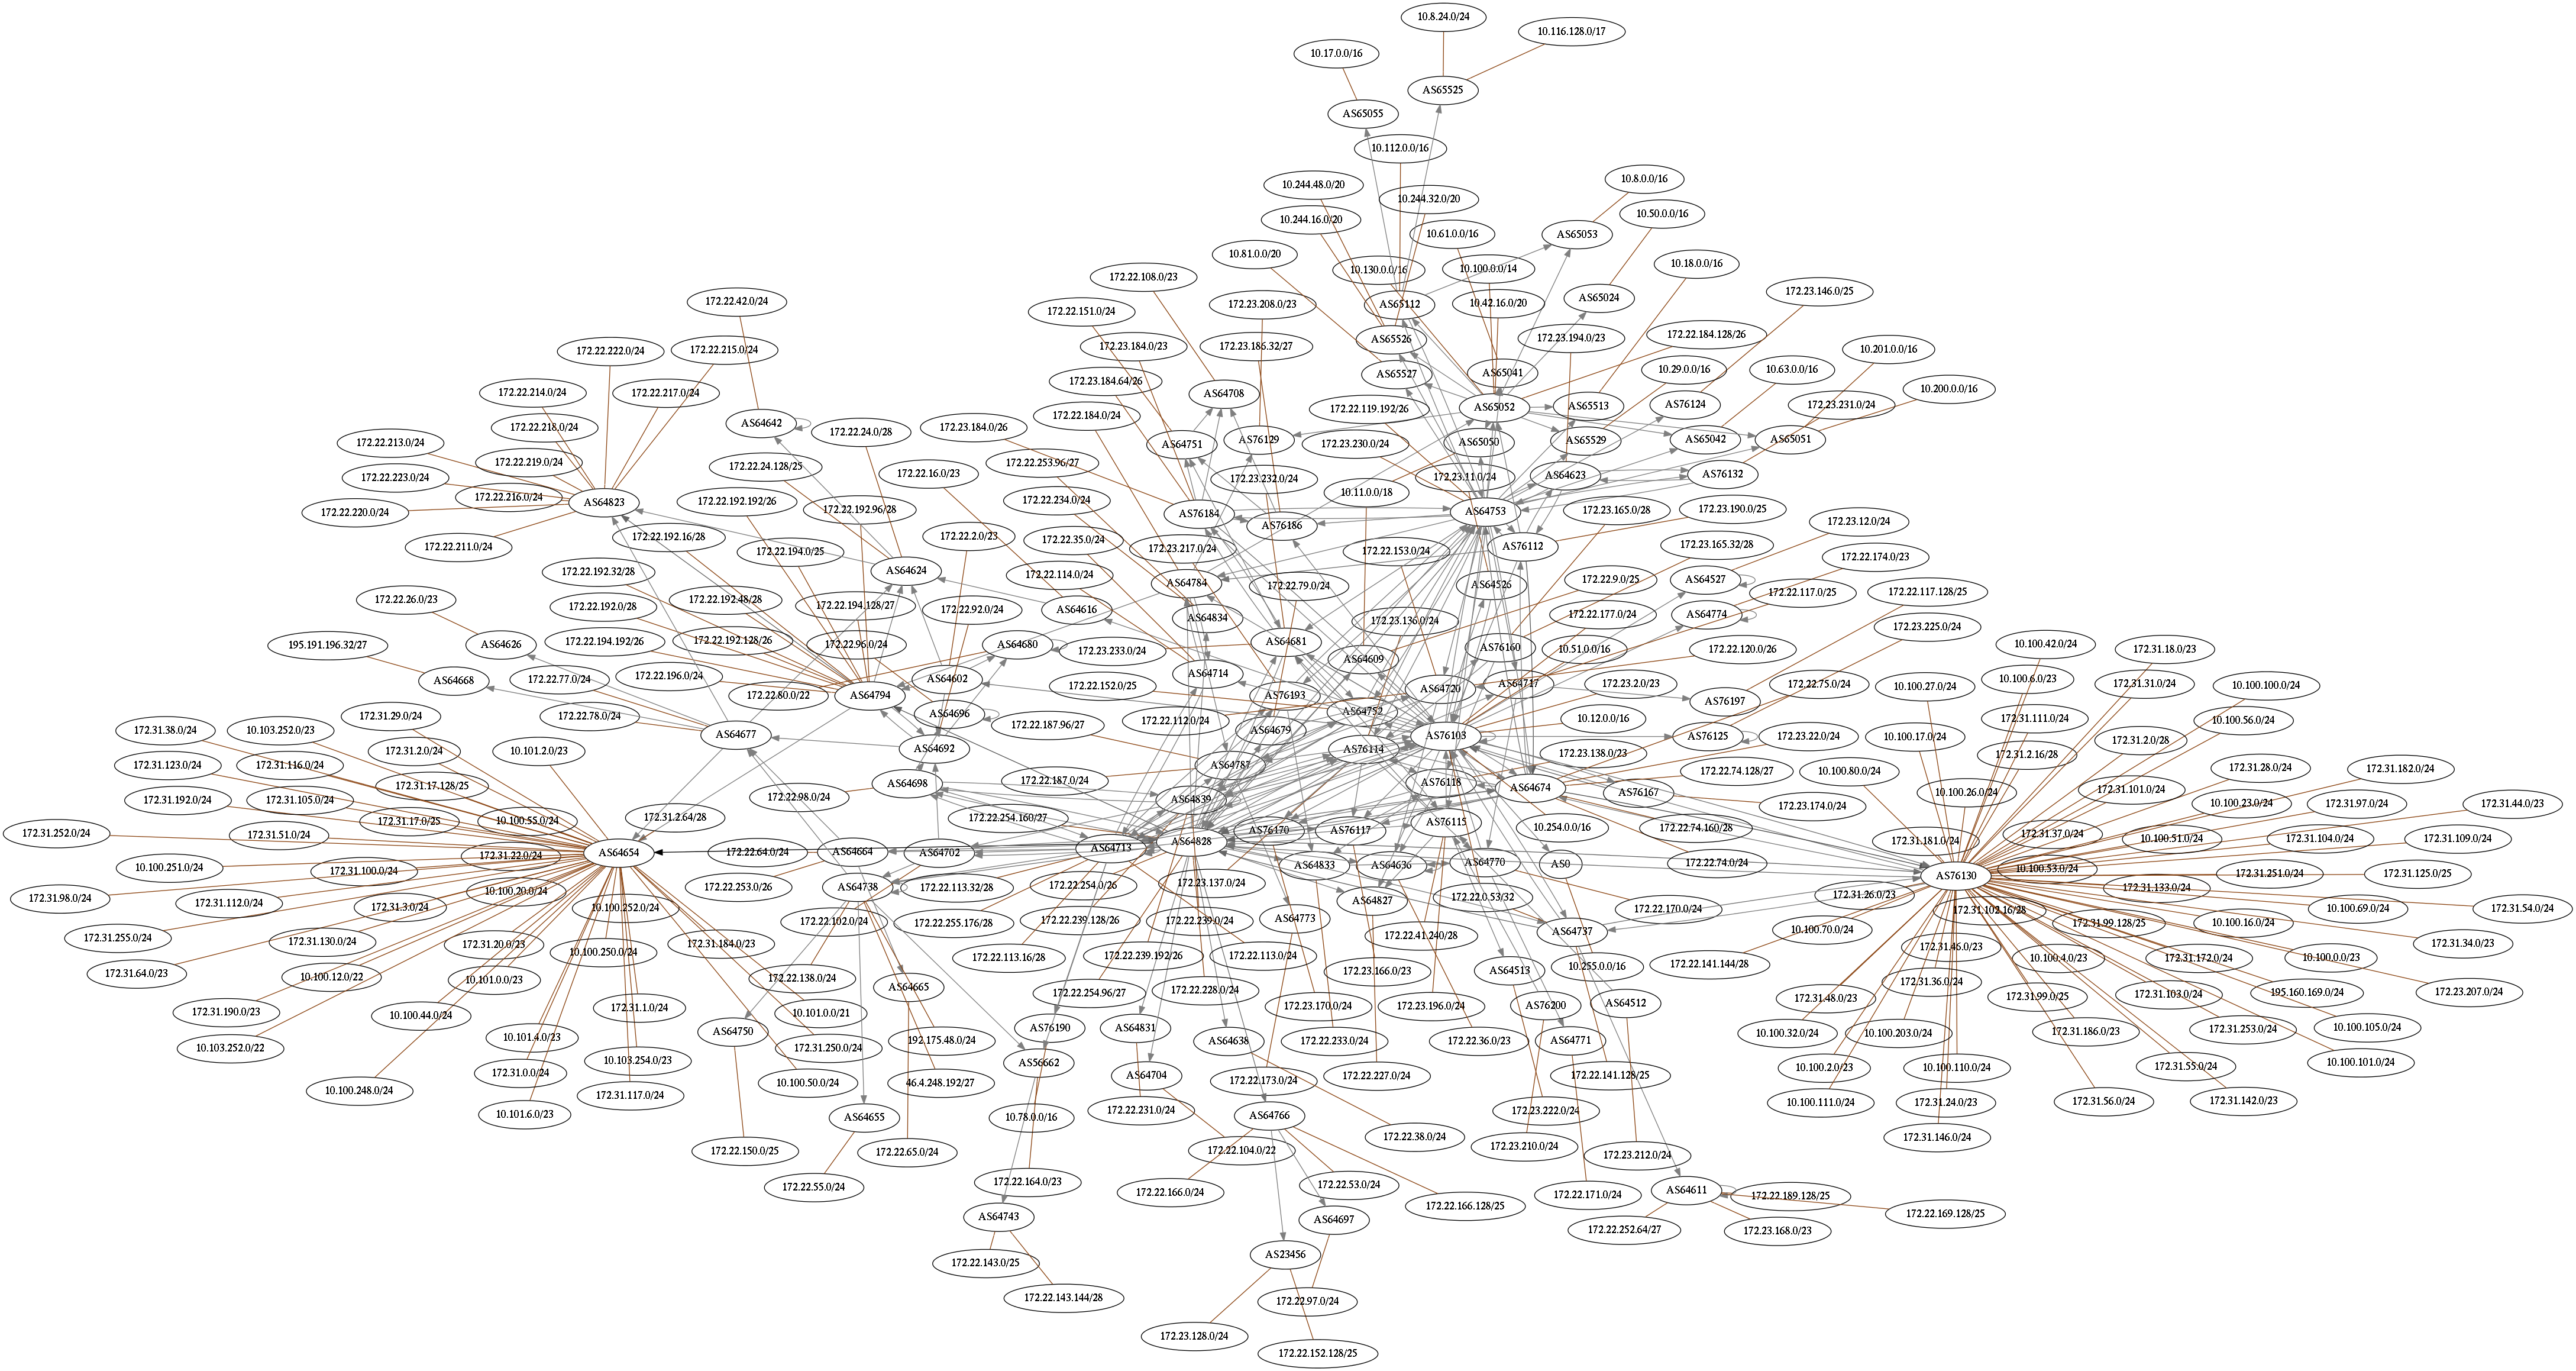 ../_images/network-graph.png